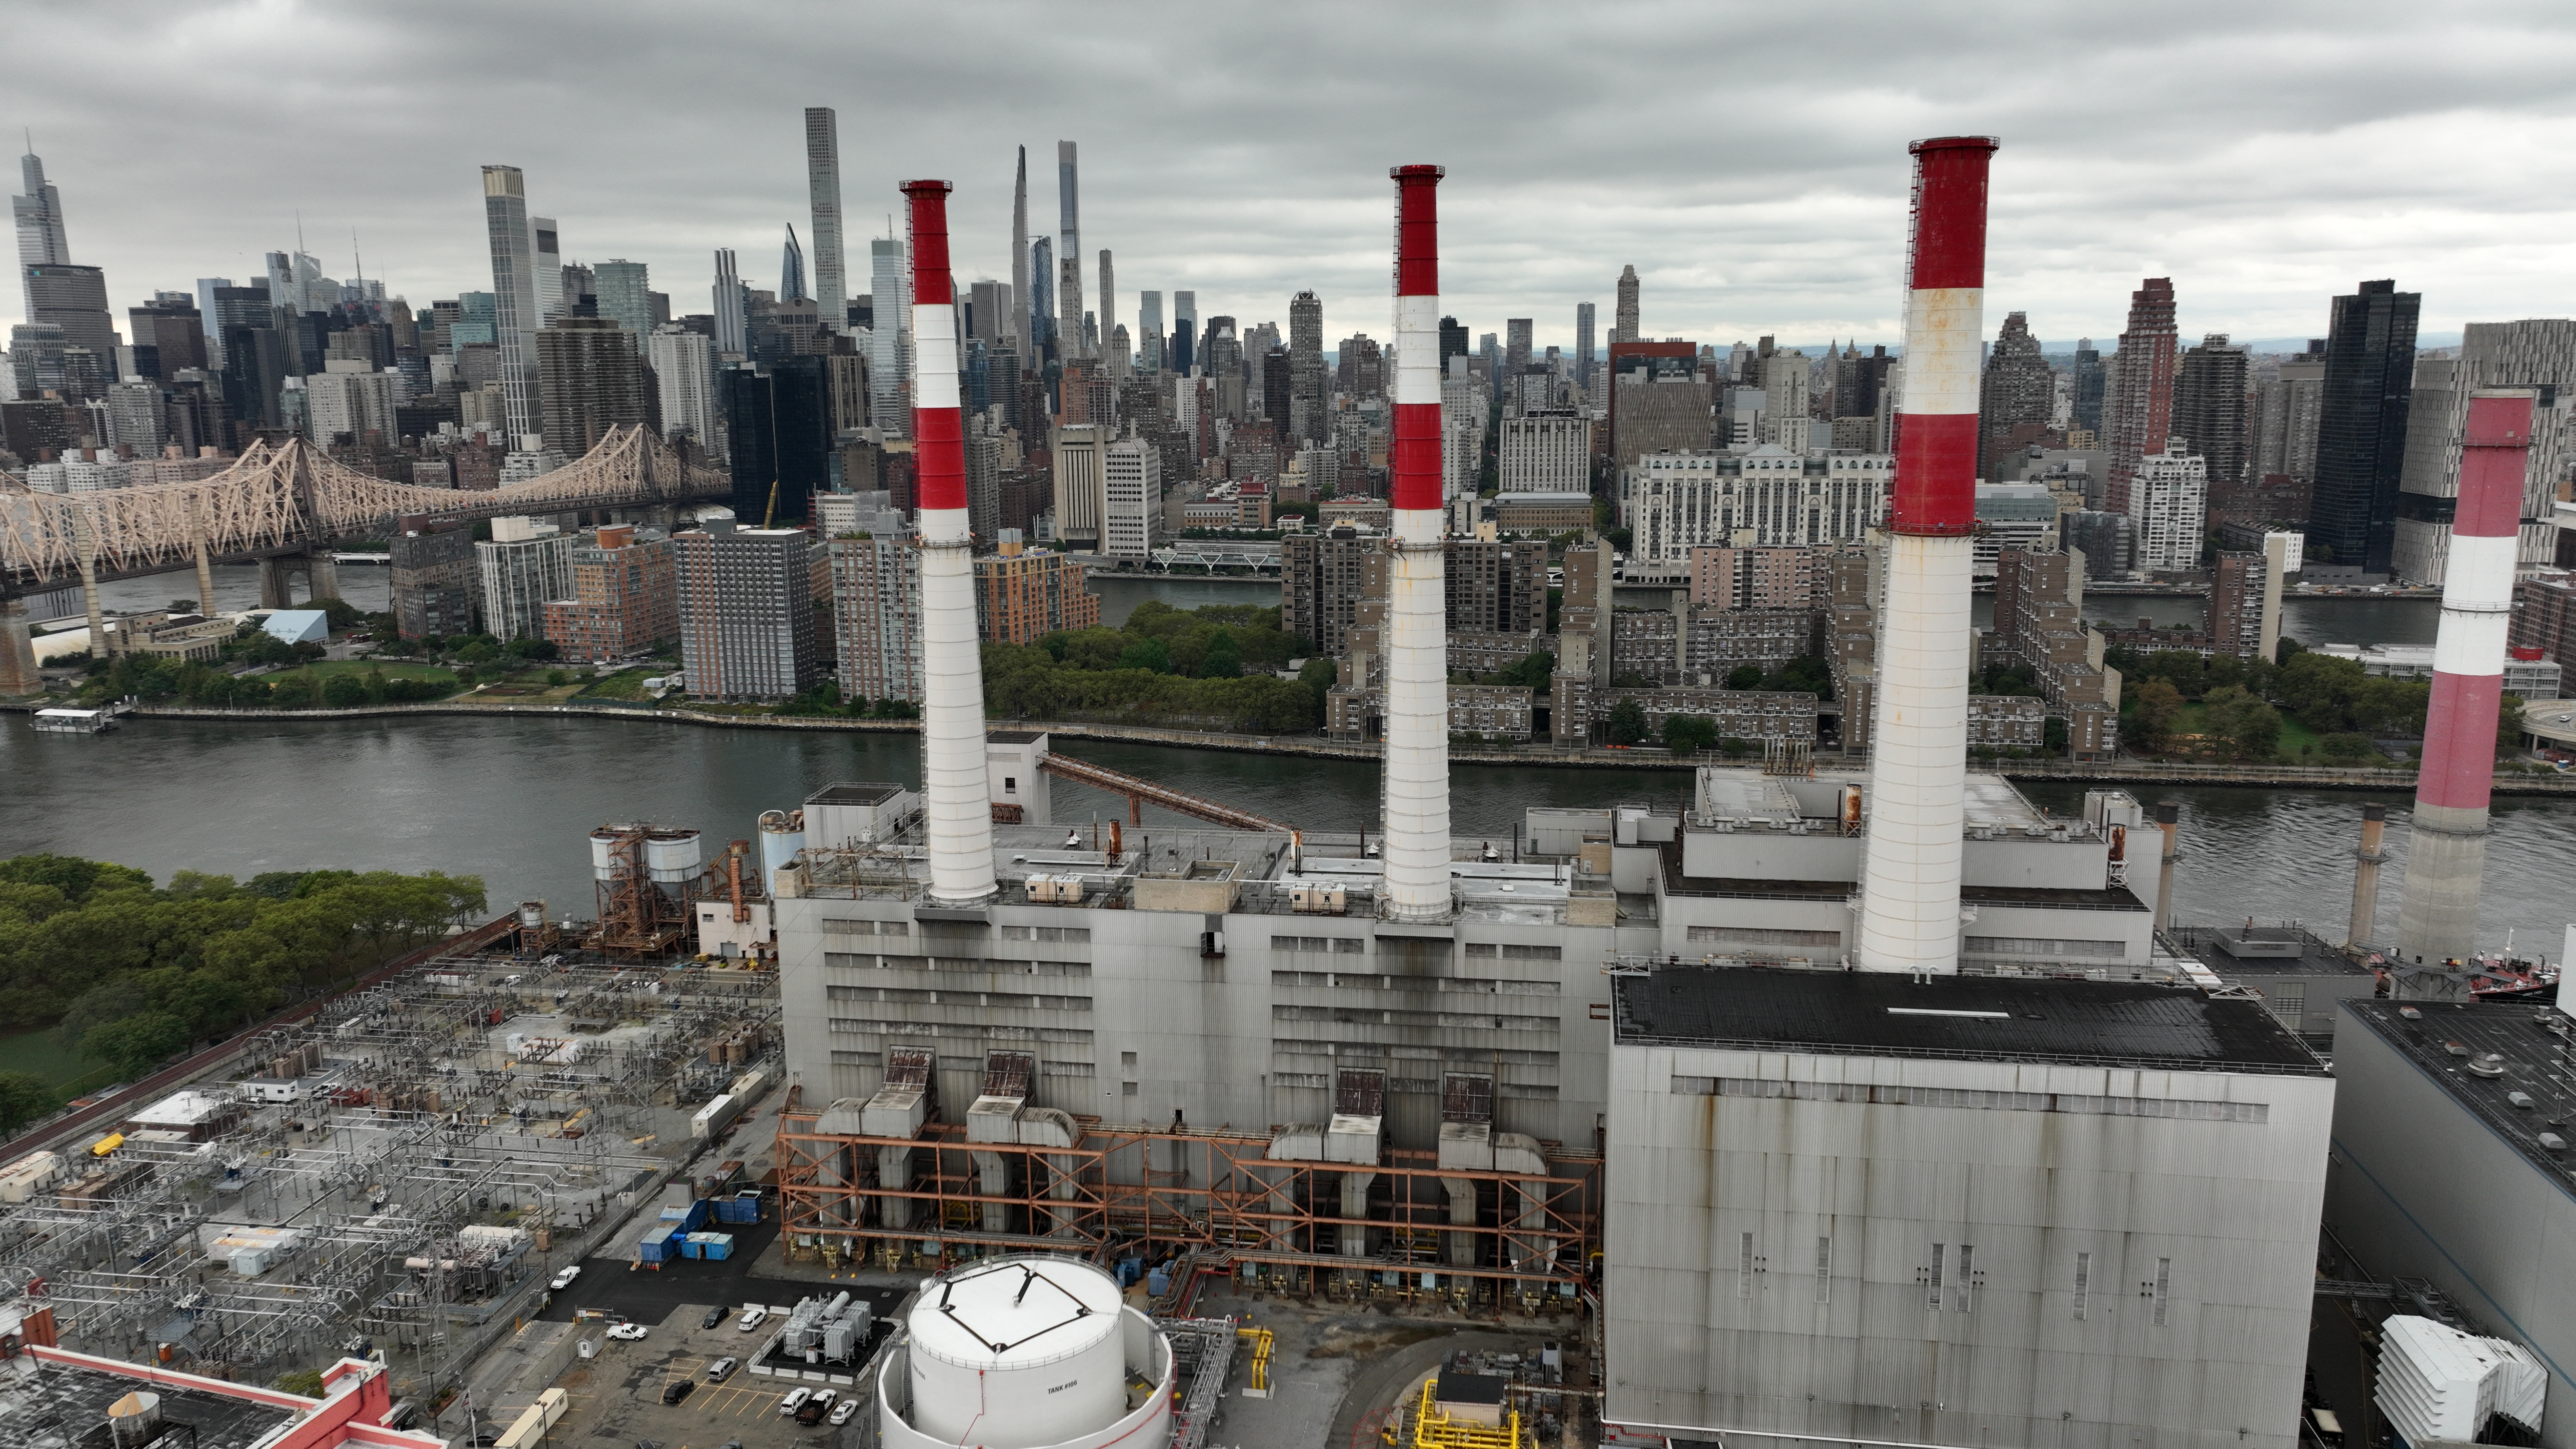 Ravenswood Generating Station in Astoria, NYC’s largest fossil fuel power plant, is charting a course to become a renewable energy hub.